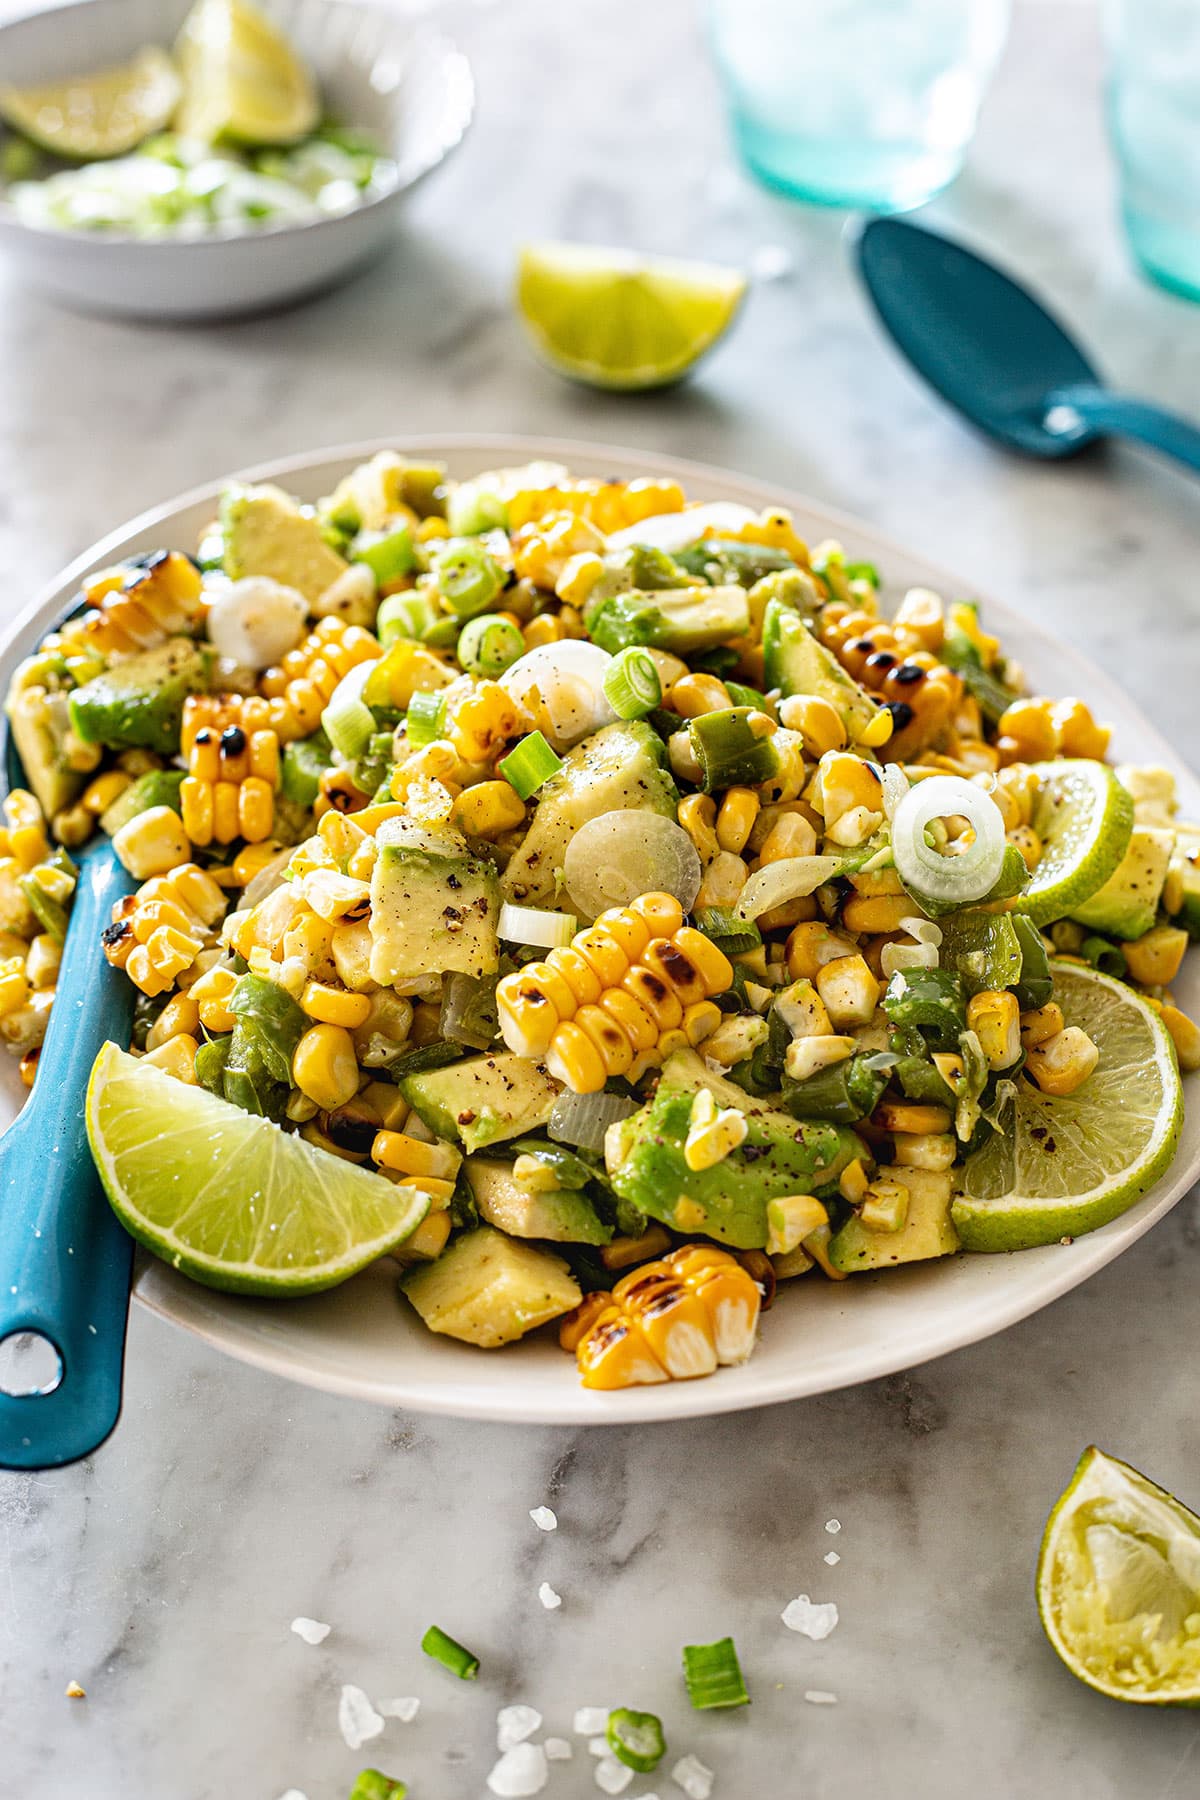 Salad with corn and avocado in a serving plate with some ingredients scattered around.